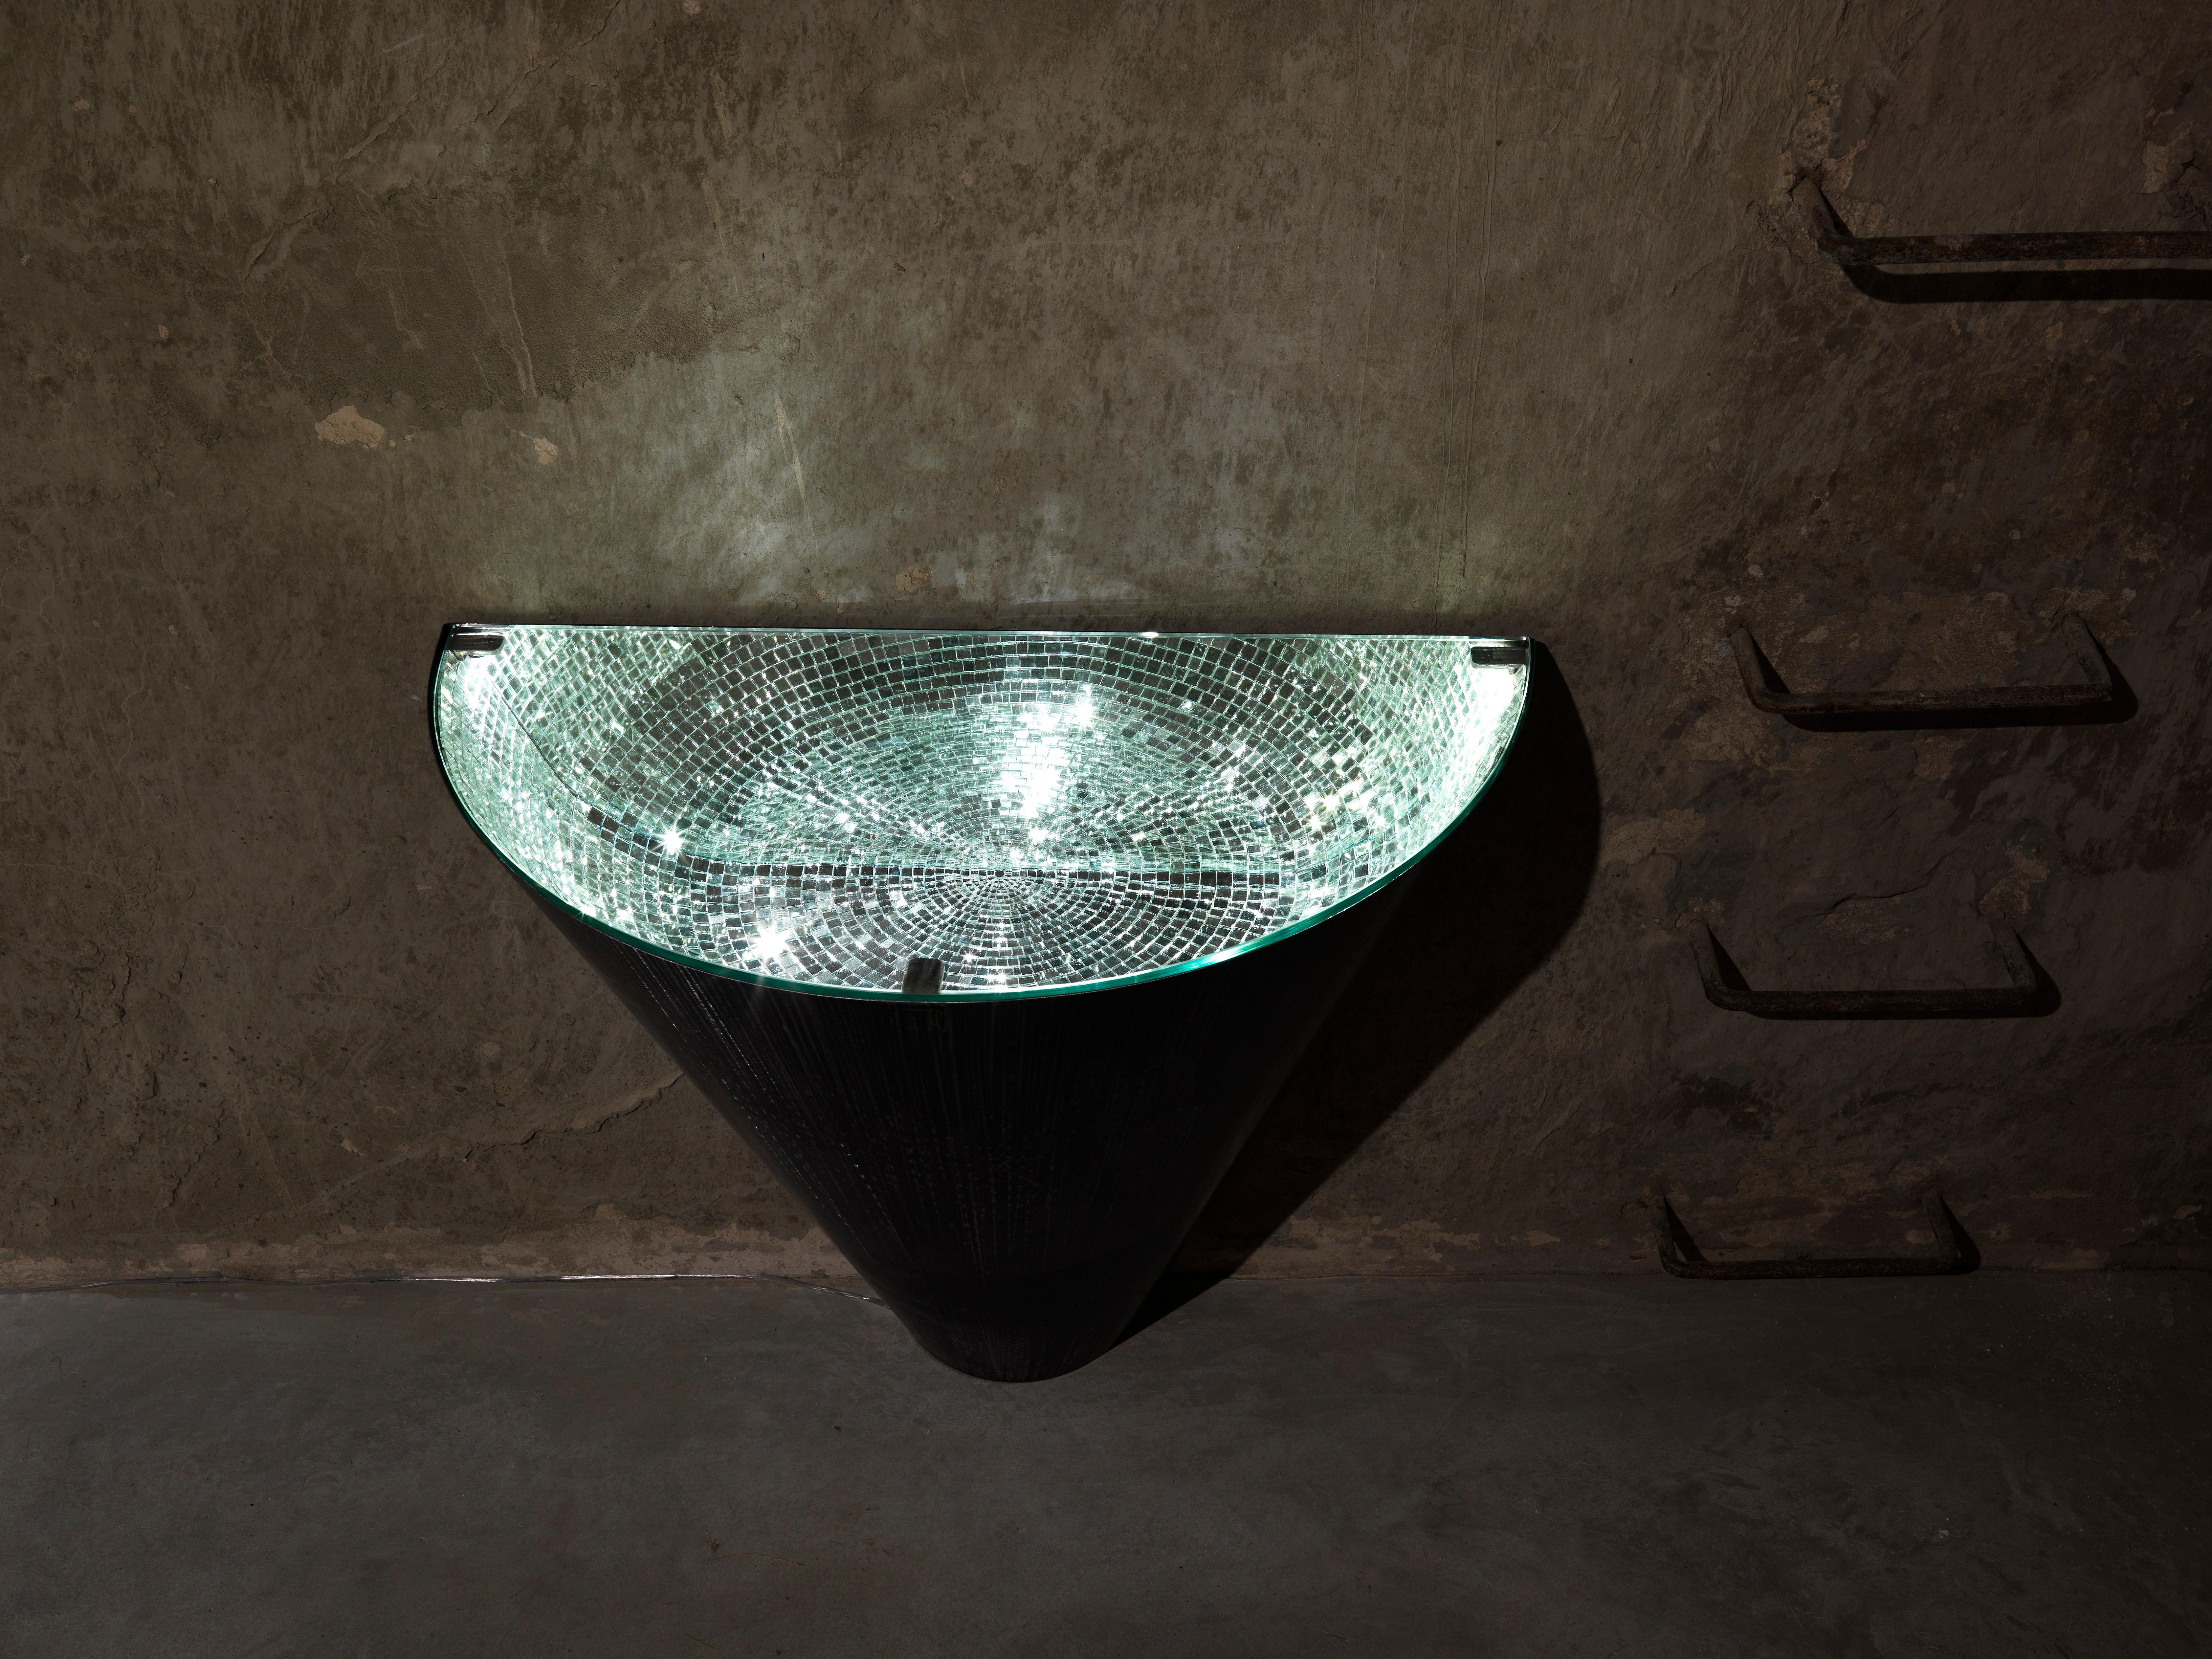 Narciso console by Davide Medri
Materials: mirror mosaic (silver), iron
Also available in gold. 
Dimensions: D 40 x W 60 x H 45 cm
Also available in 50 x 100 x 90 cm

Davide Medri was born in Cesena on August 7th 1967 and graduated at the Academy of